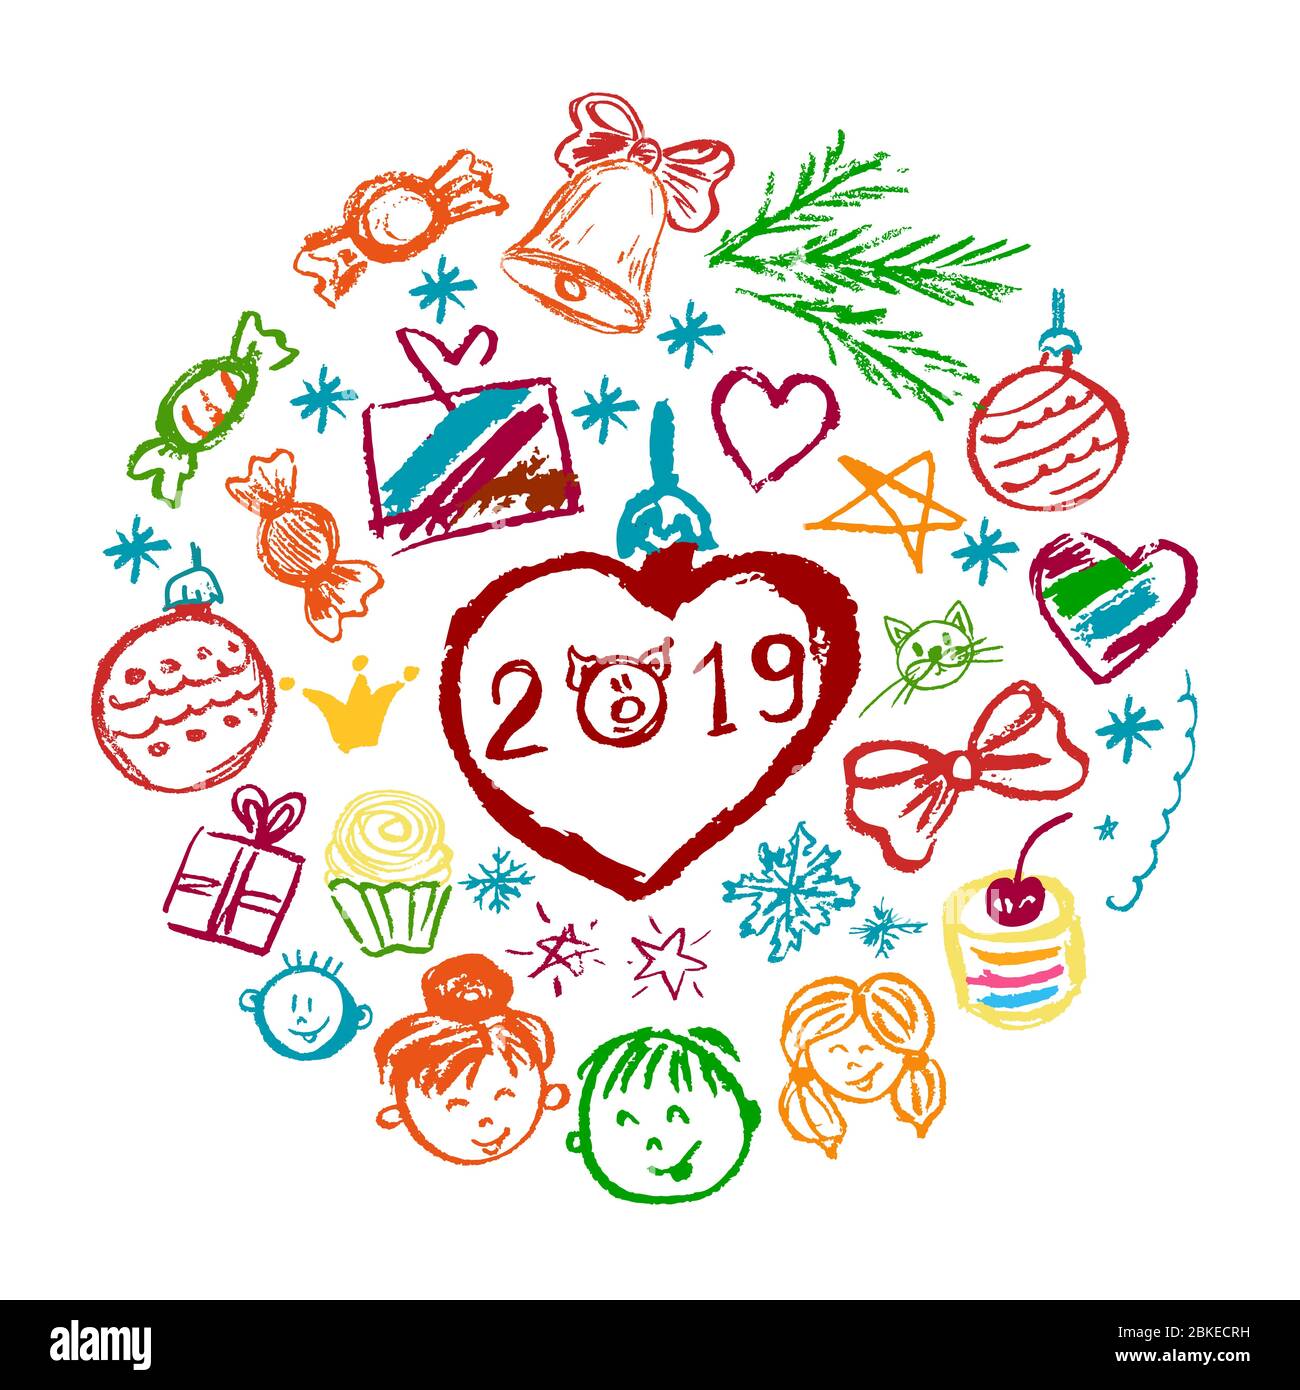 New Year 2019. New Year's set of elements for your creativity. Children's drawings of wax crayons on a white background. Christmas tree, Christmas tre Stock Vector